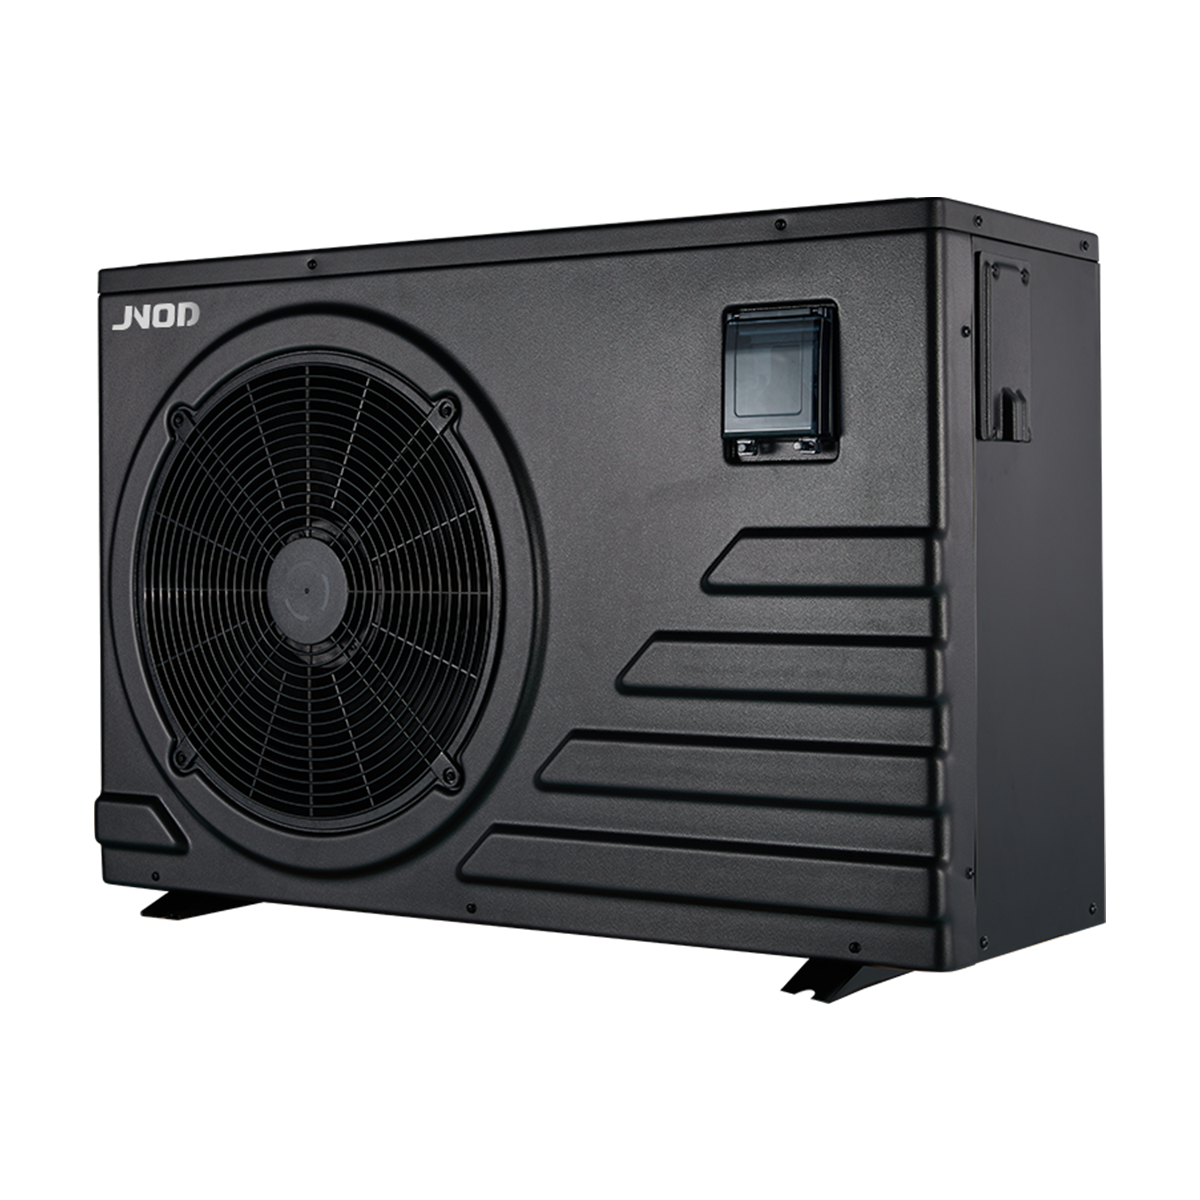 Dc Inverter Commercial Hotels Swimming Pool Heat Pump